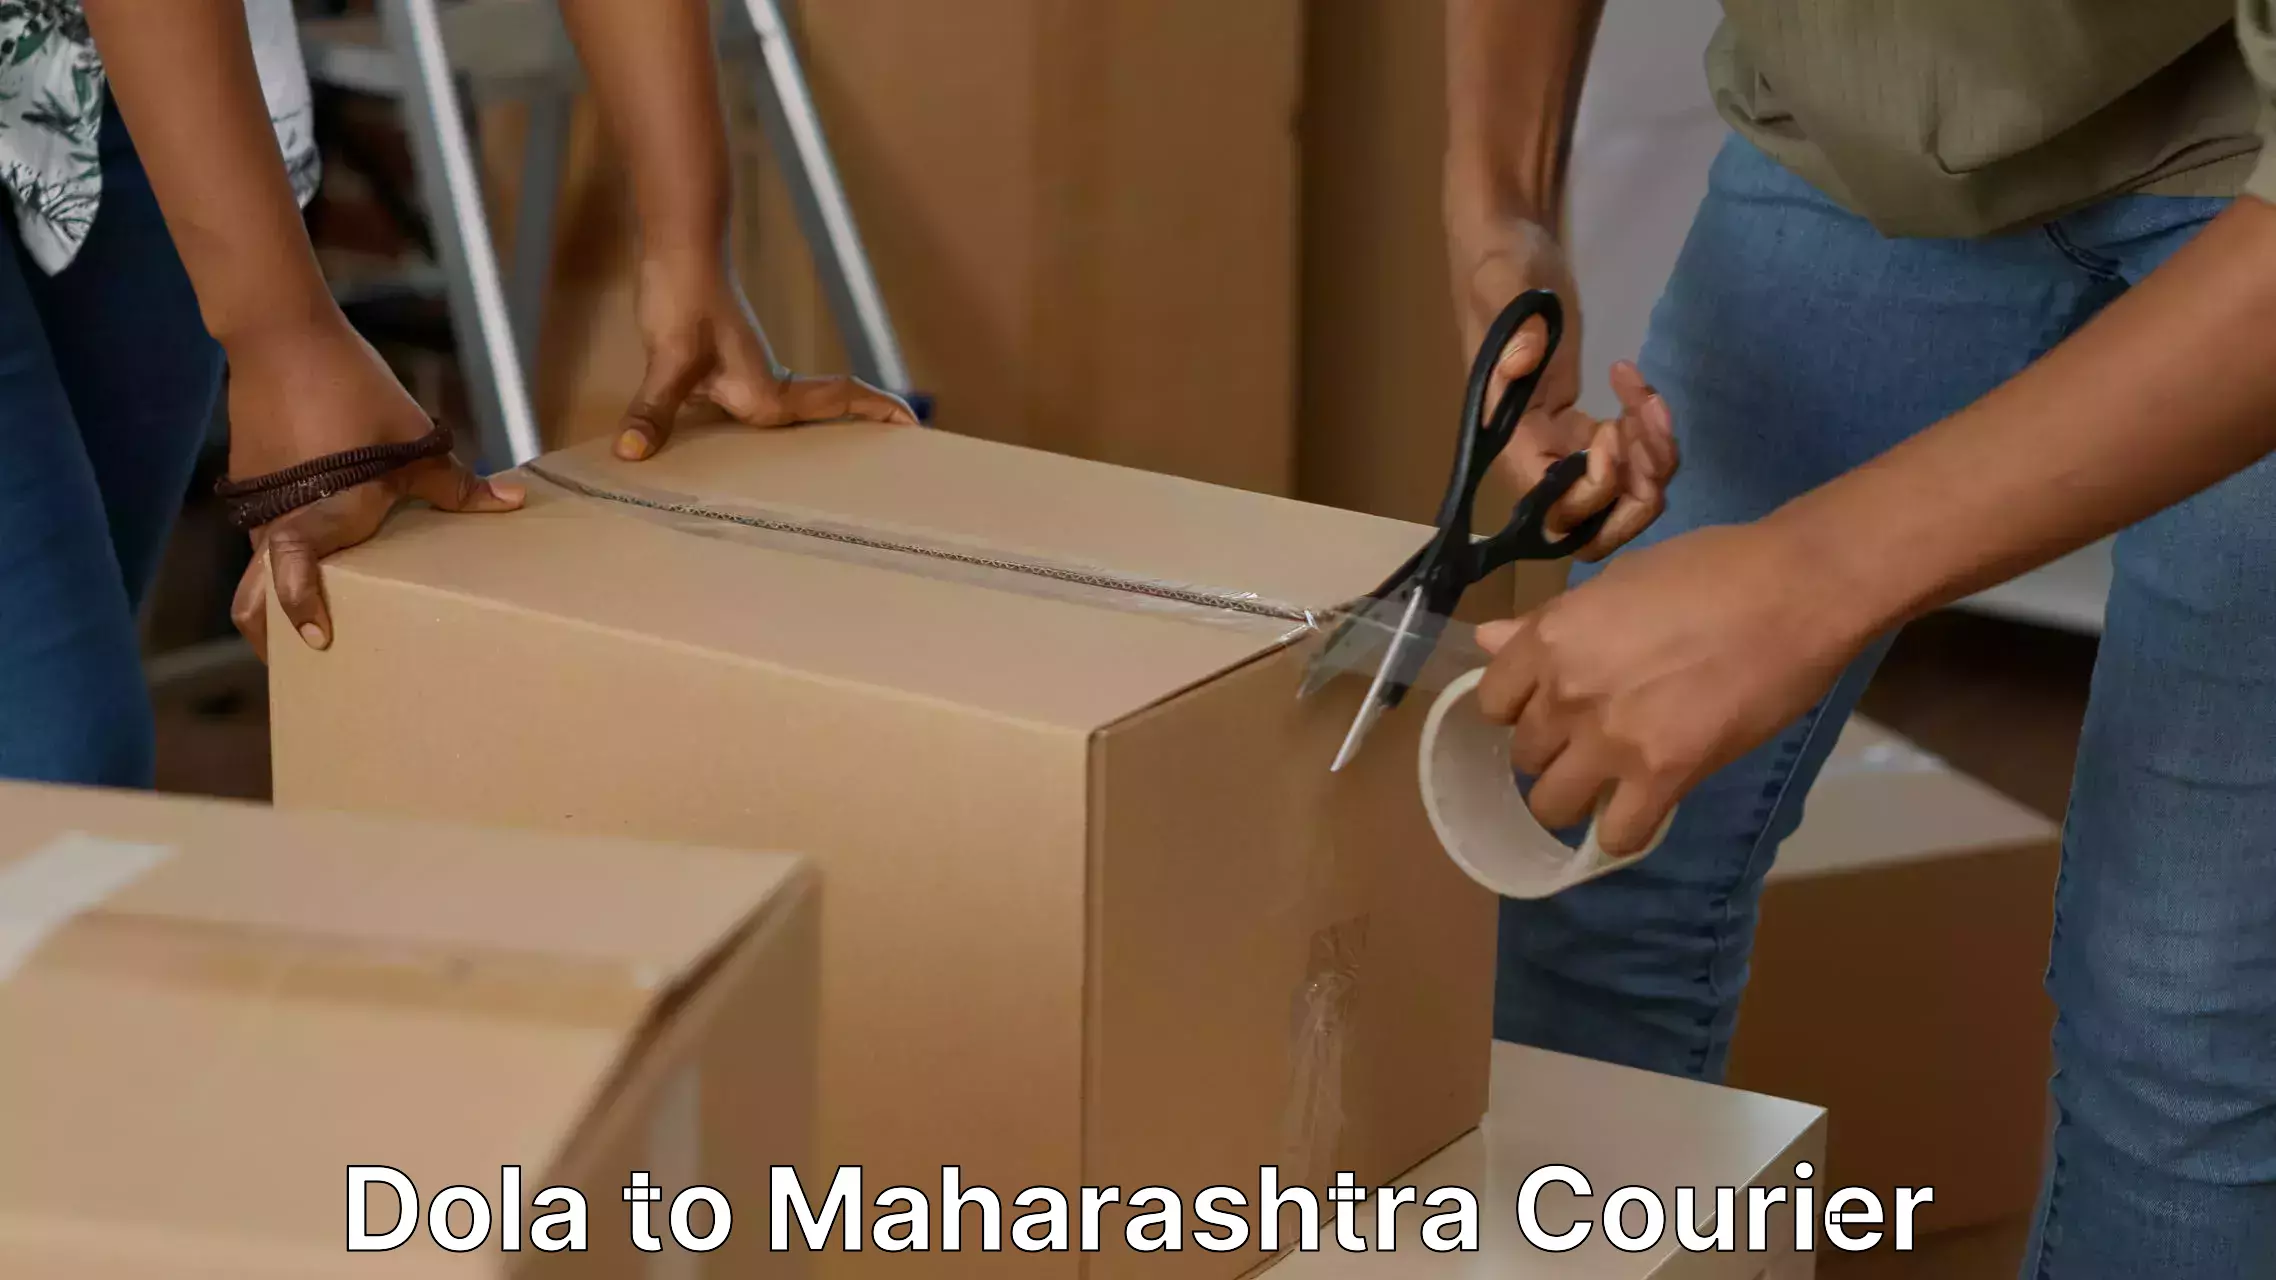 Furniture relocation experts Dola to Ahmednagar